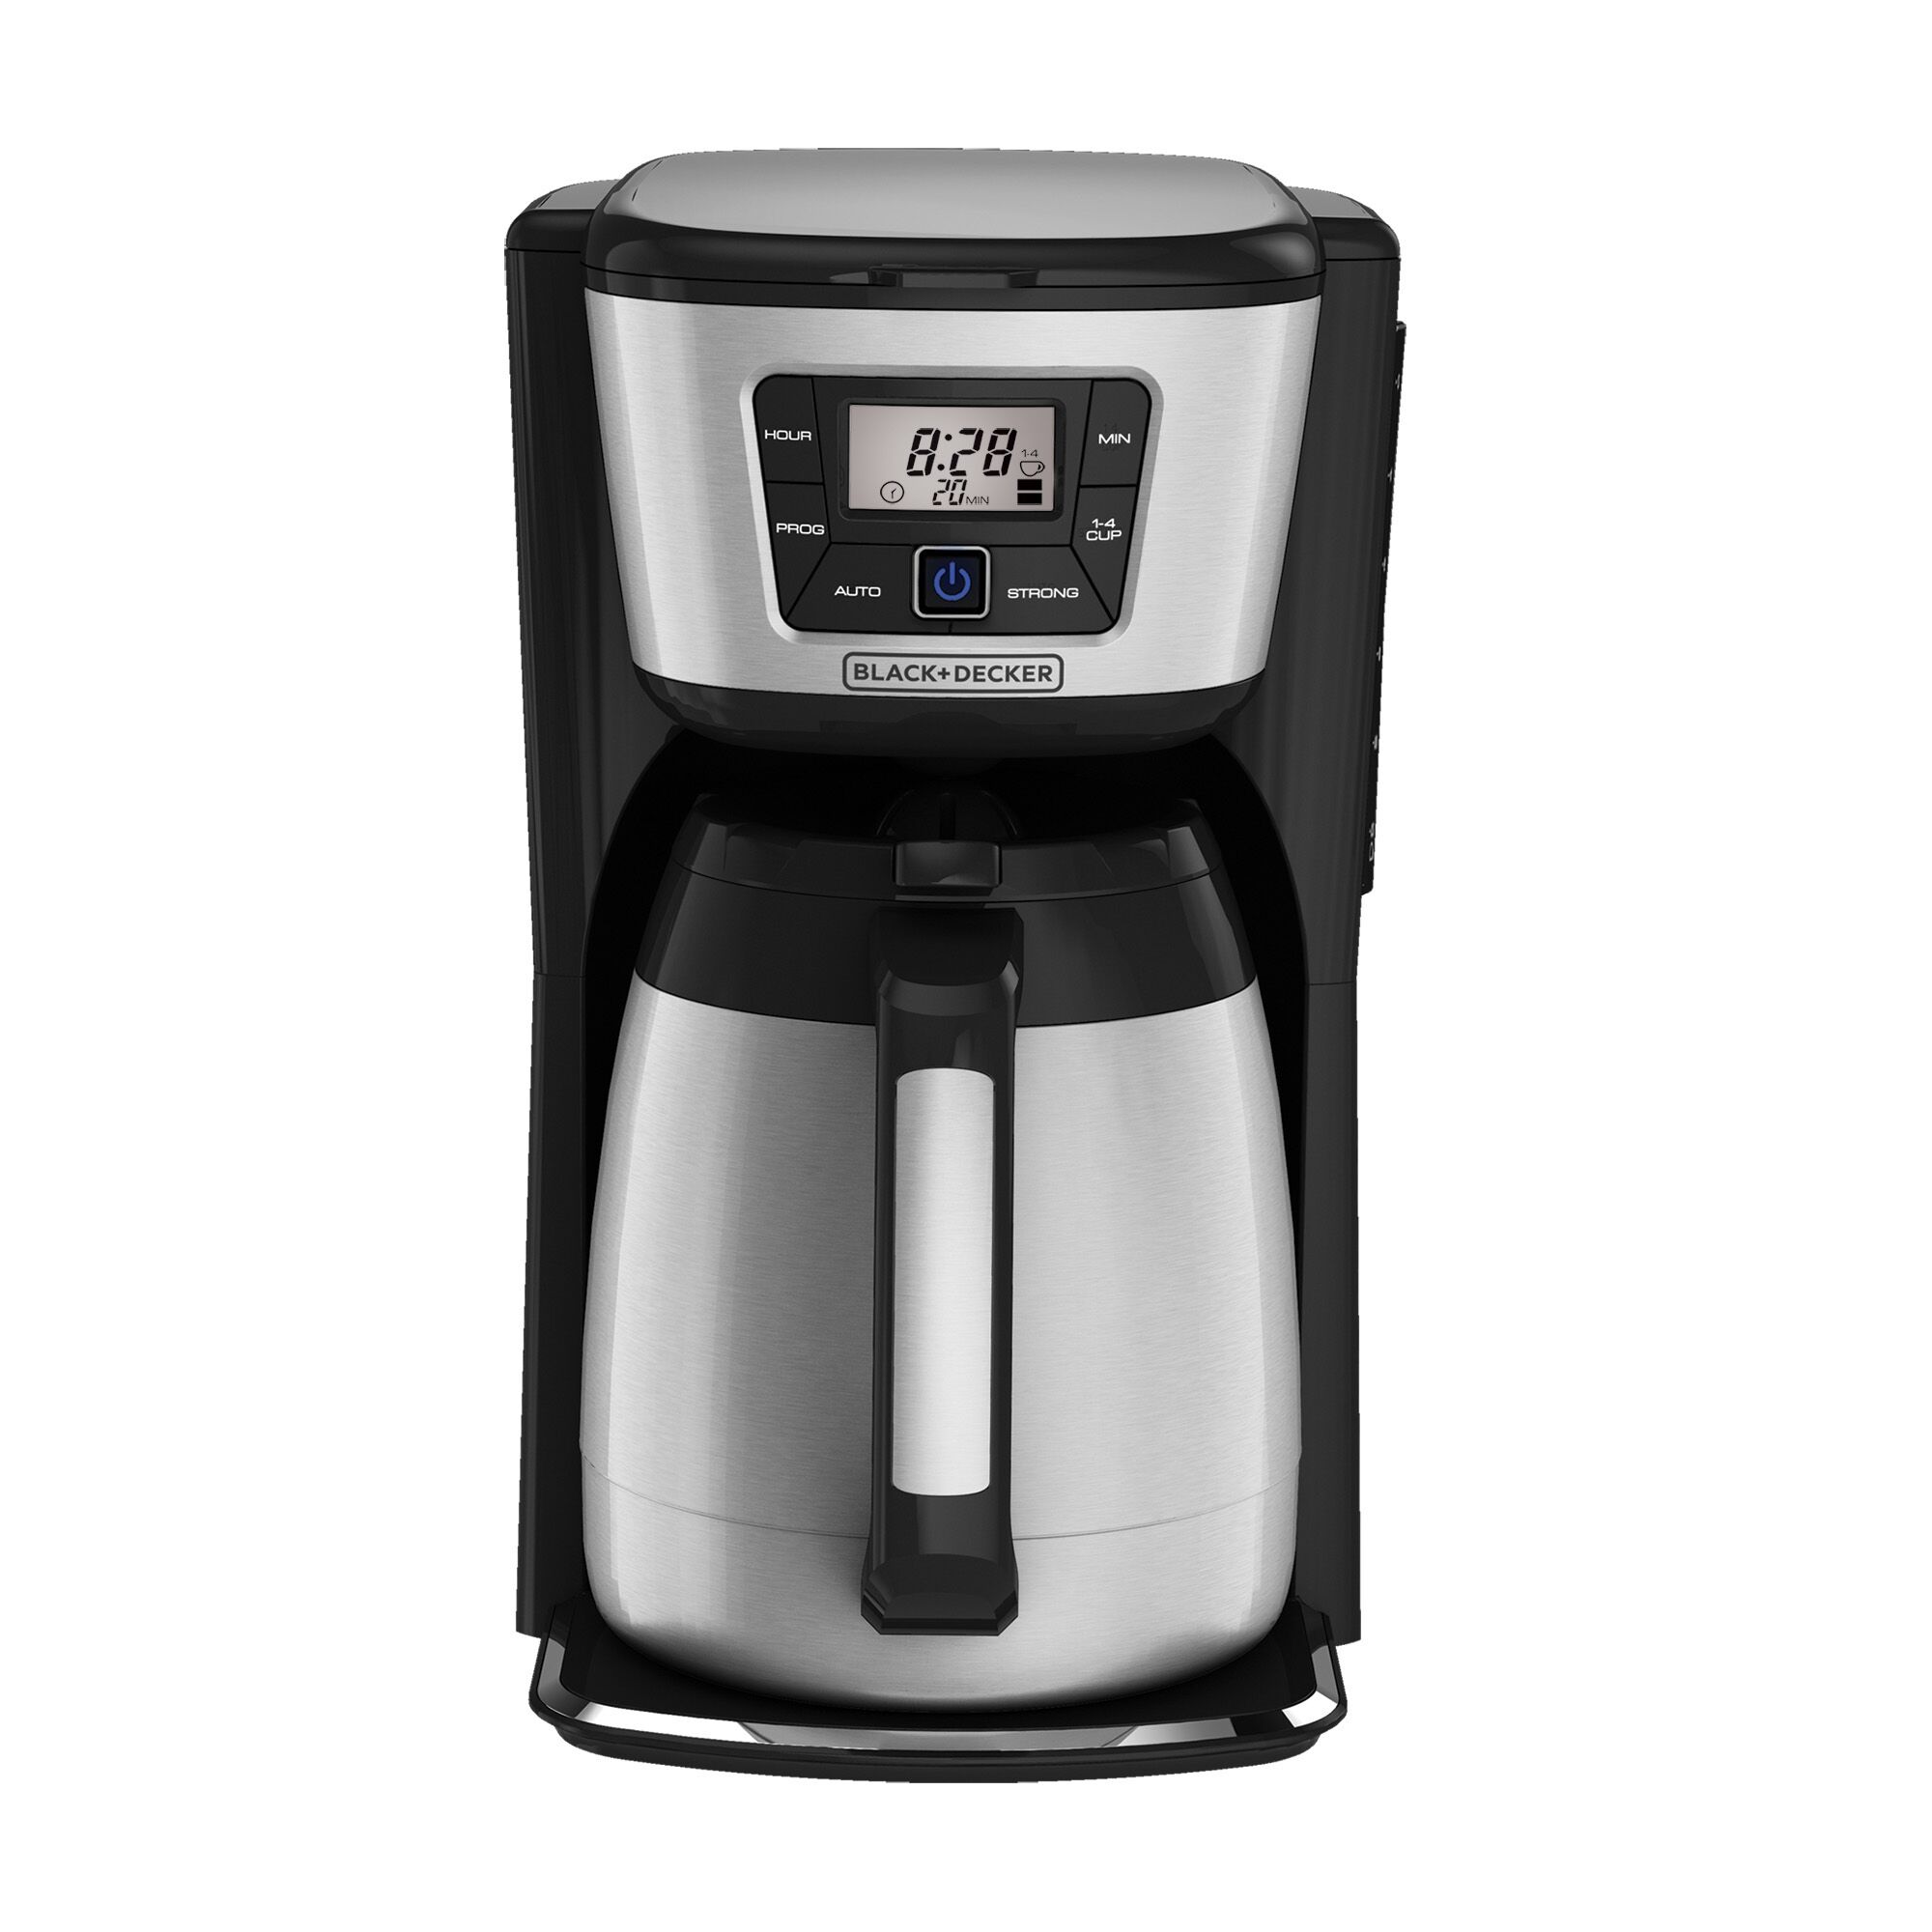 Profile of 12 cup thermal coffeemaker.